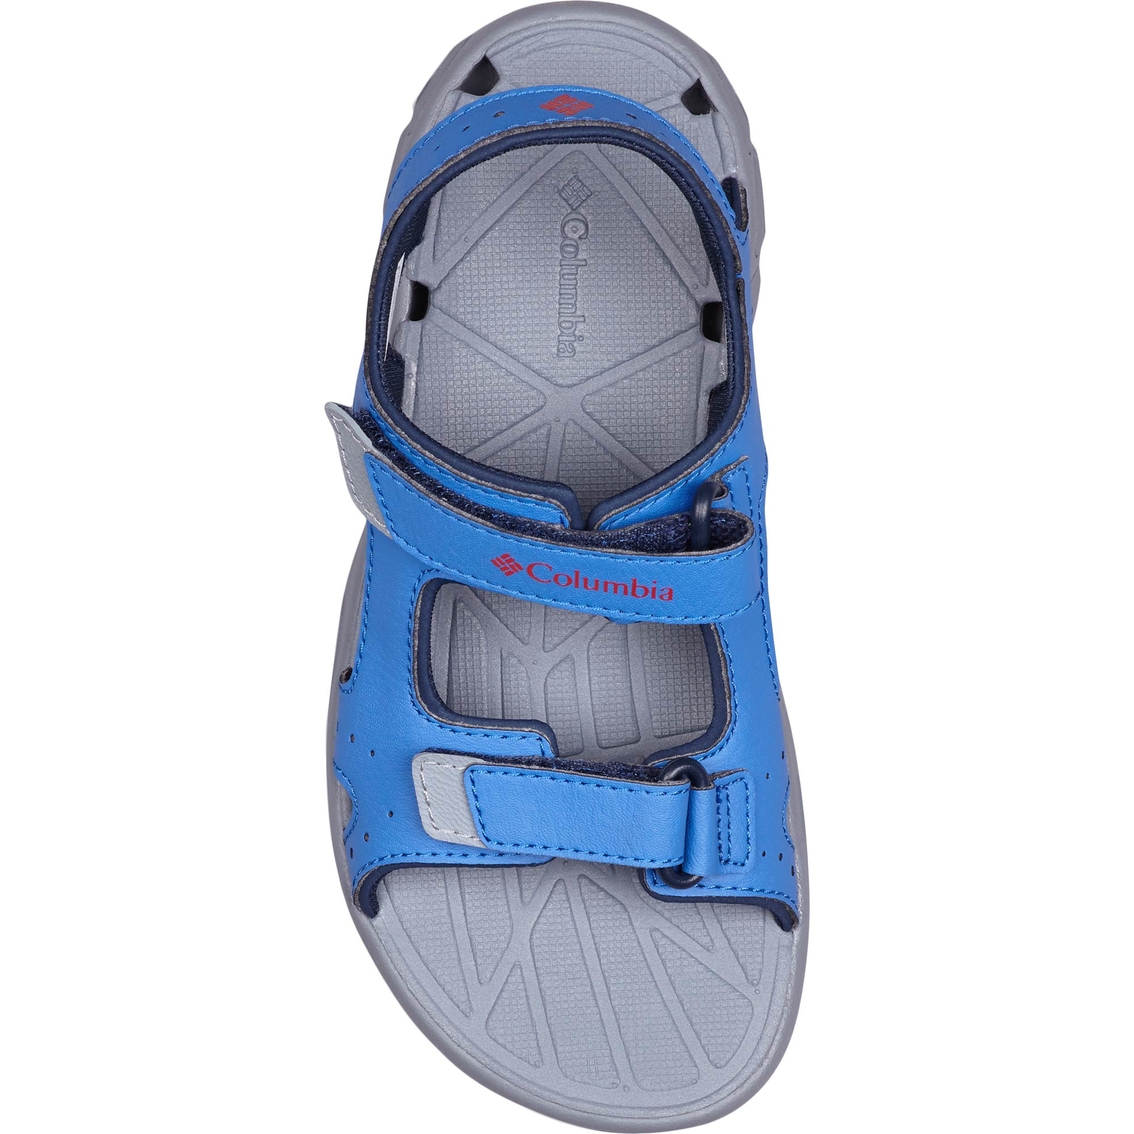 Columbia Kids Techsun Vent Sandals - Image 5 of 6